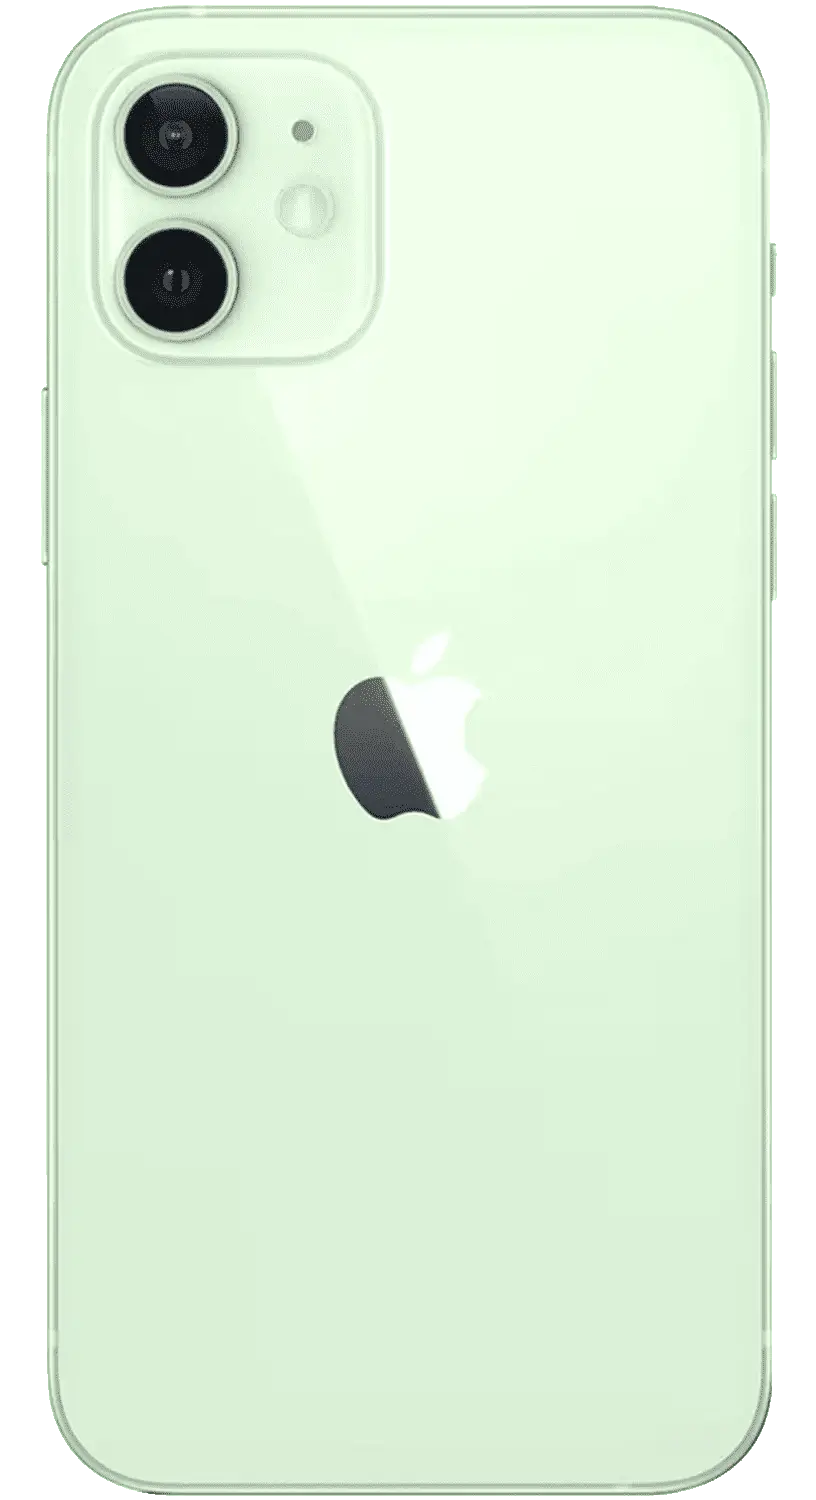 iphone 12 front